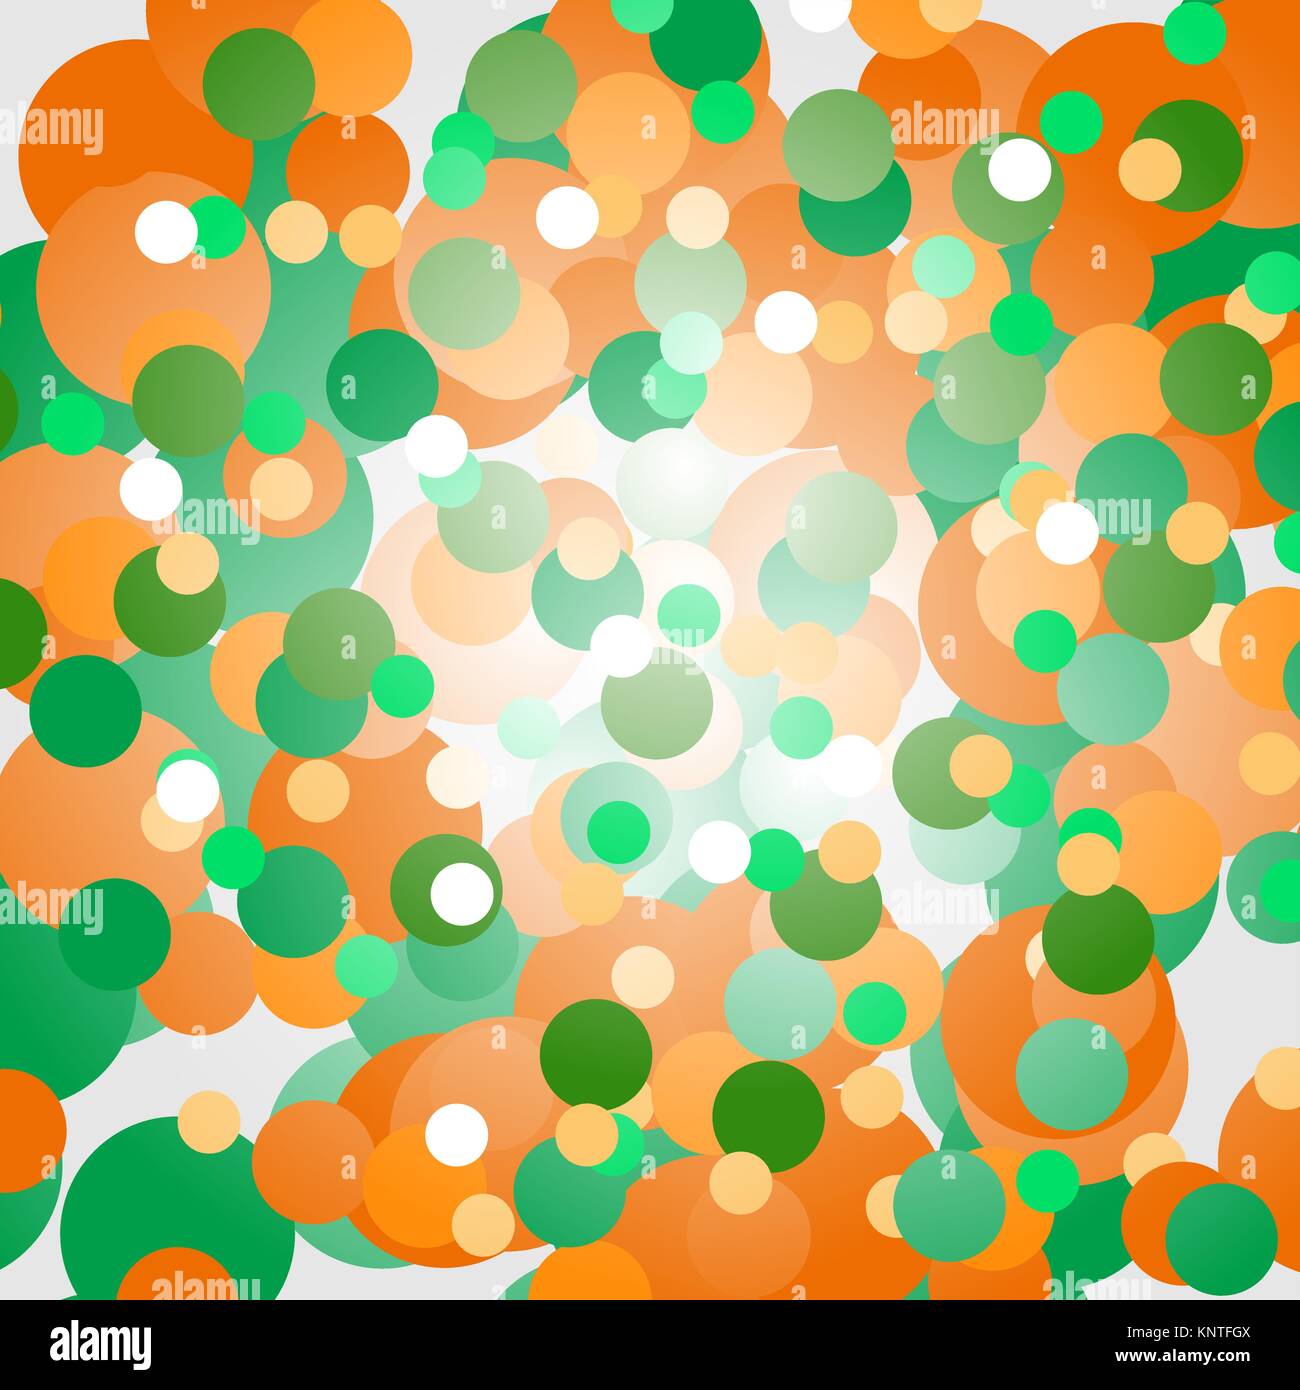 Background of orange and green circles Stock Vector